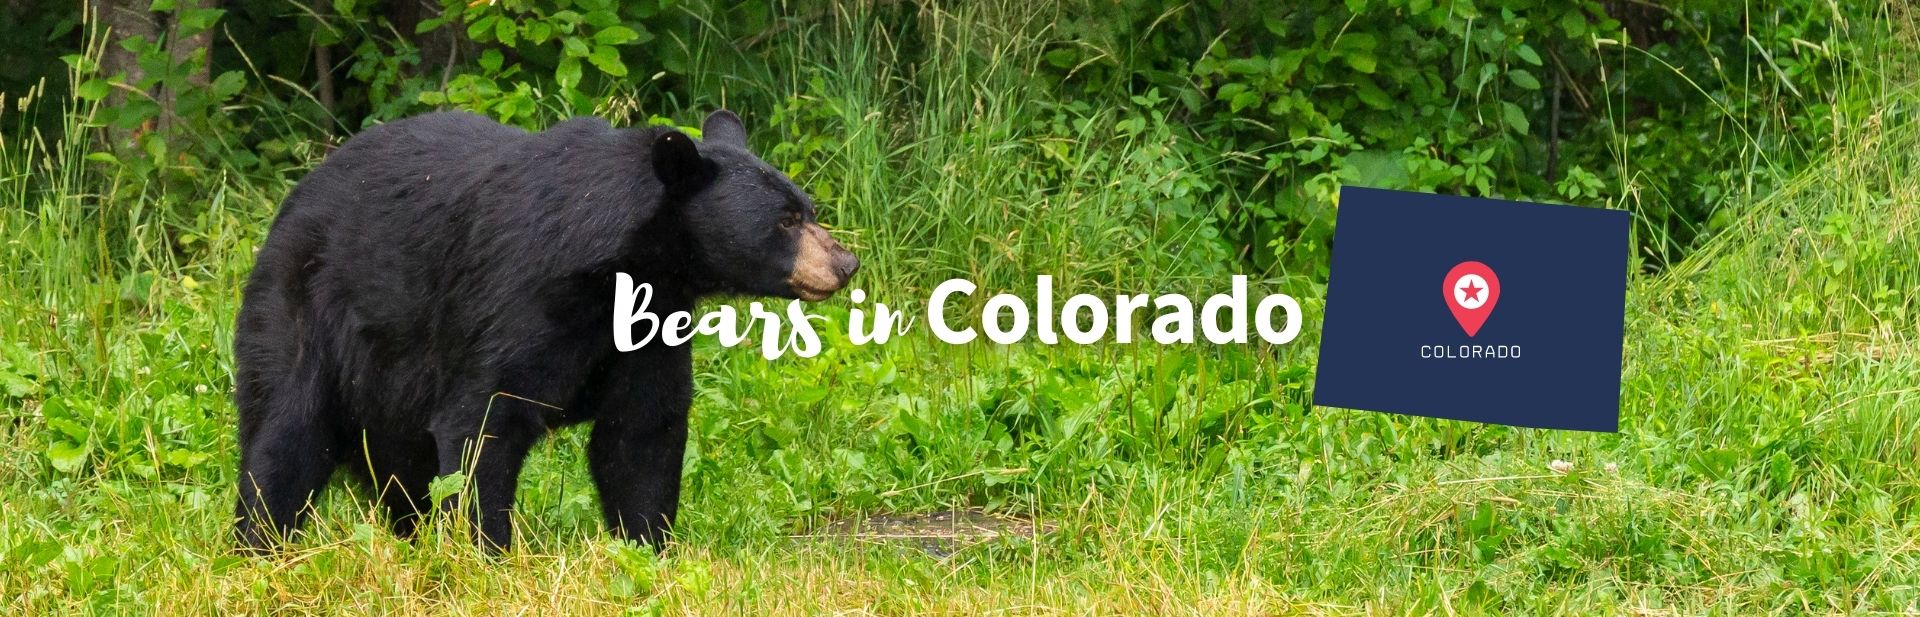 Bears in Colorado: What Kind Of Bears Live in Colorado?